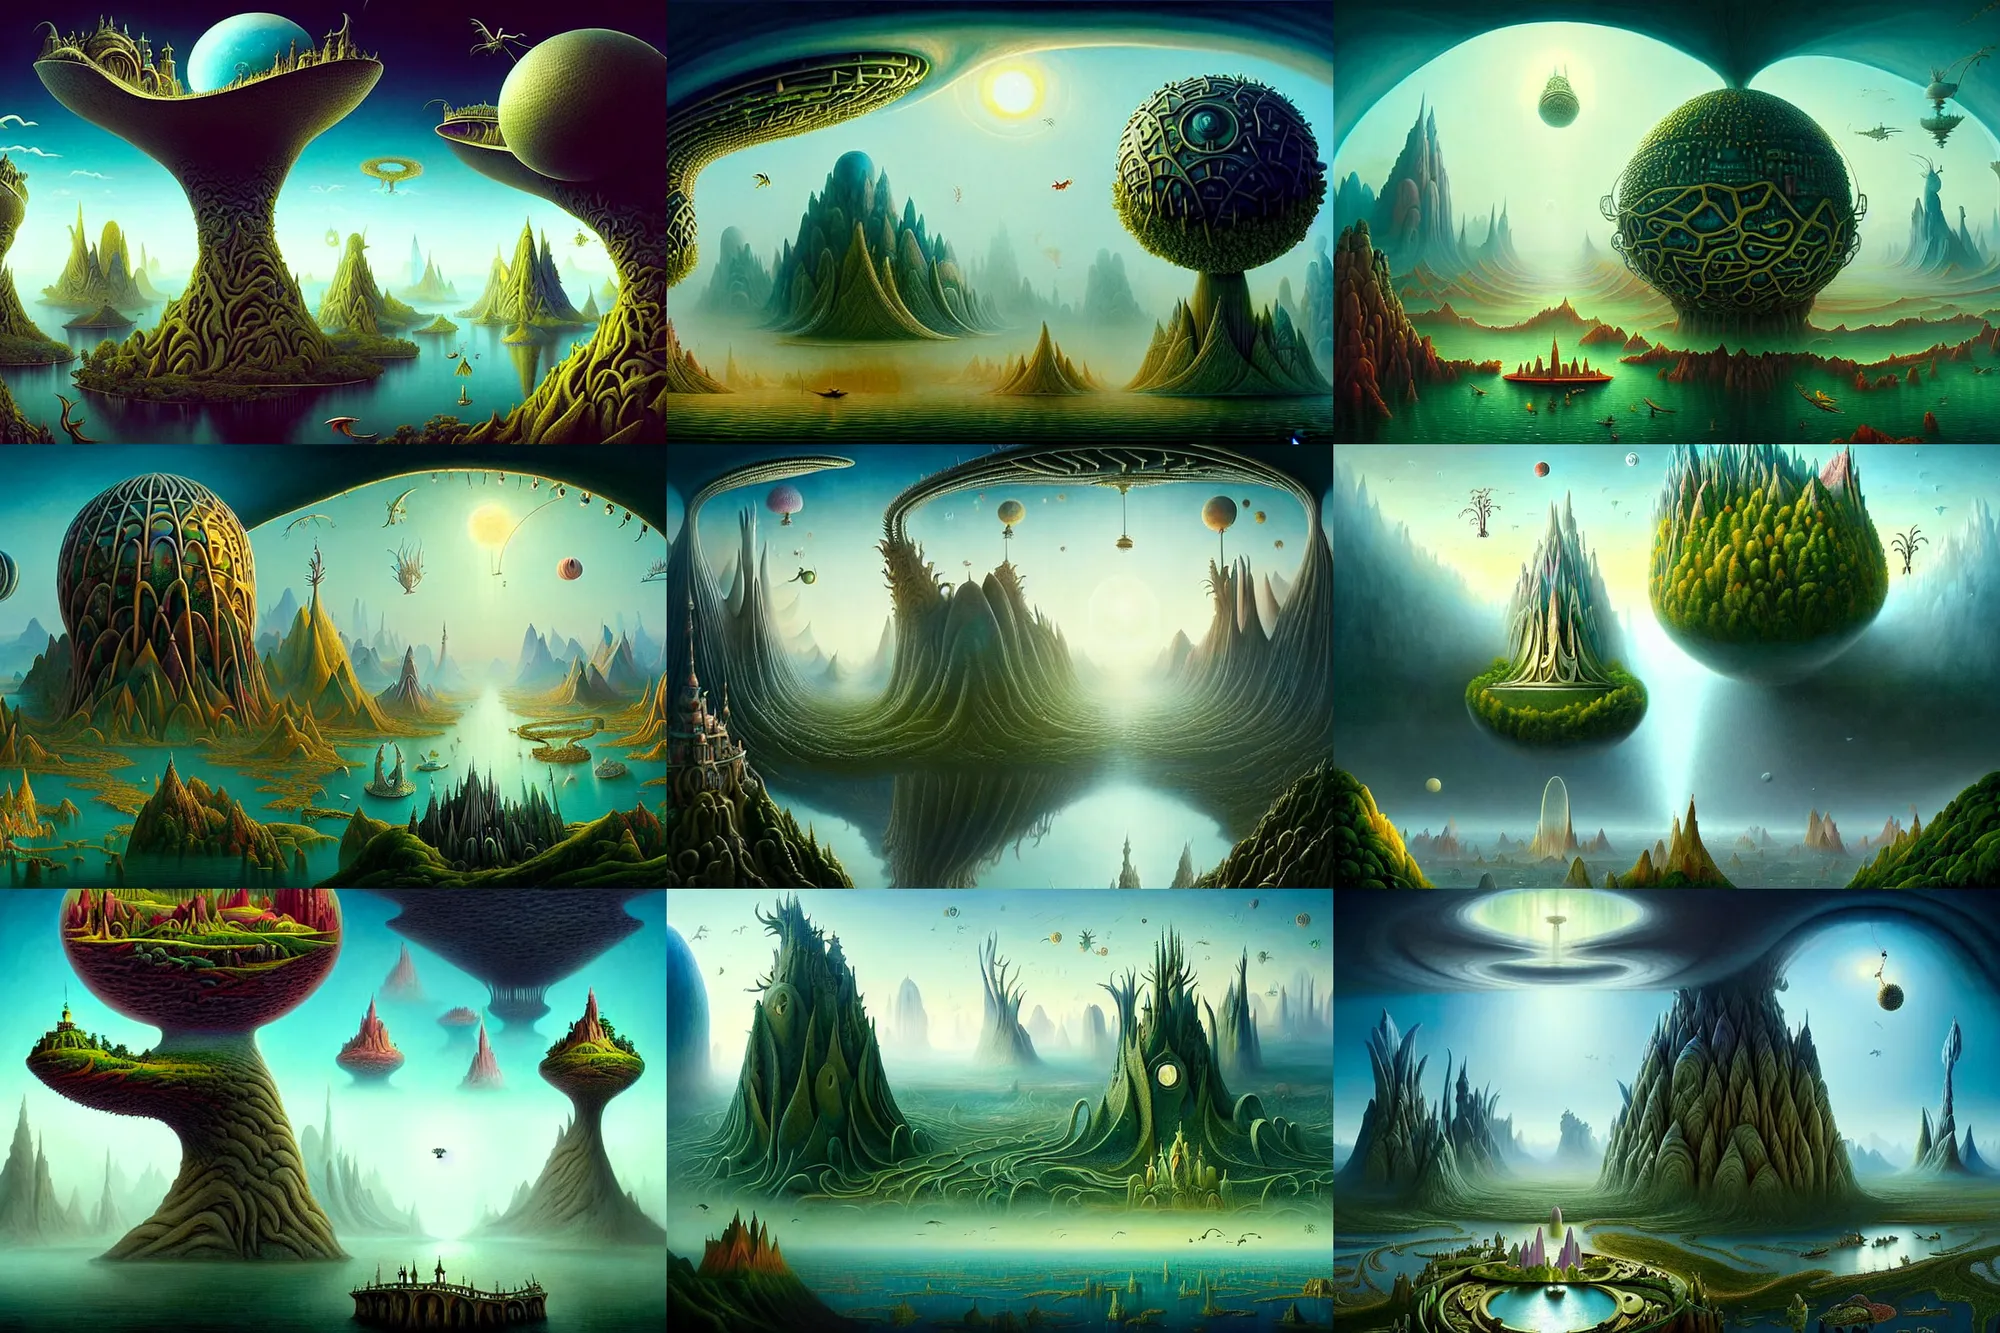 Prompt: a beguiling epic stunning beautiful and insanely detailed matte painting of alien dream worlds with surreal architecture designed by Heironymous Bosch, mega structures inspired by Heironymous Bosch's Garden of Earthly Delights, vast surreal landscape and horizon by Asher Durand and Cyril Rolando and Raymond Swanland, masterpiece!!, grand!, imaginative!!!, whimsical!!, epic scale, intricate details, sense of awe, elite, wonder, insanely complex, masterful composition, sharp focus, fantasy realism, dramatic lighting